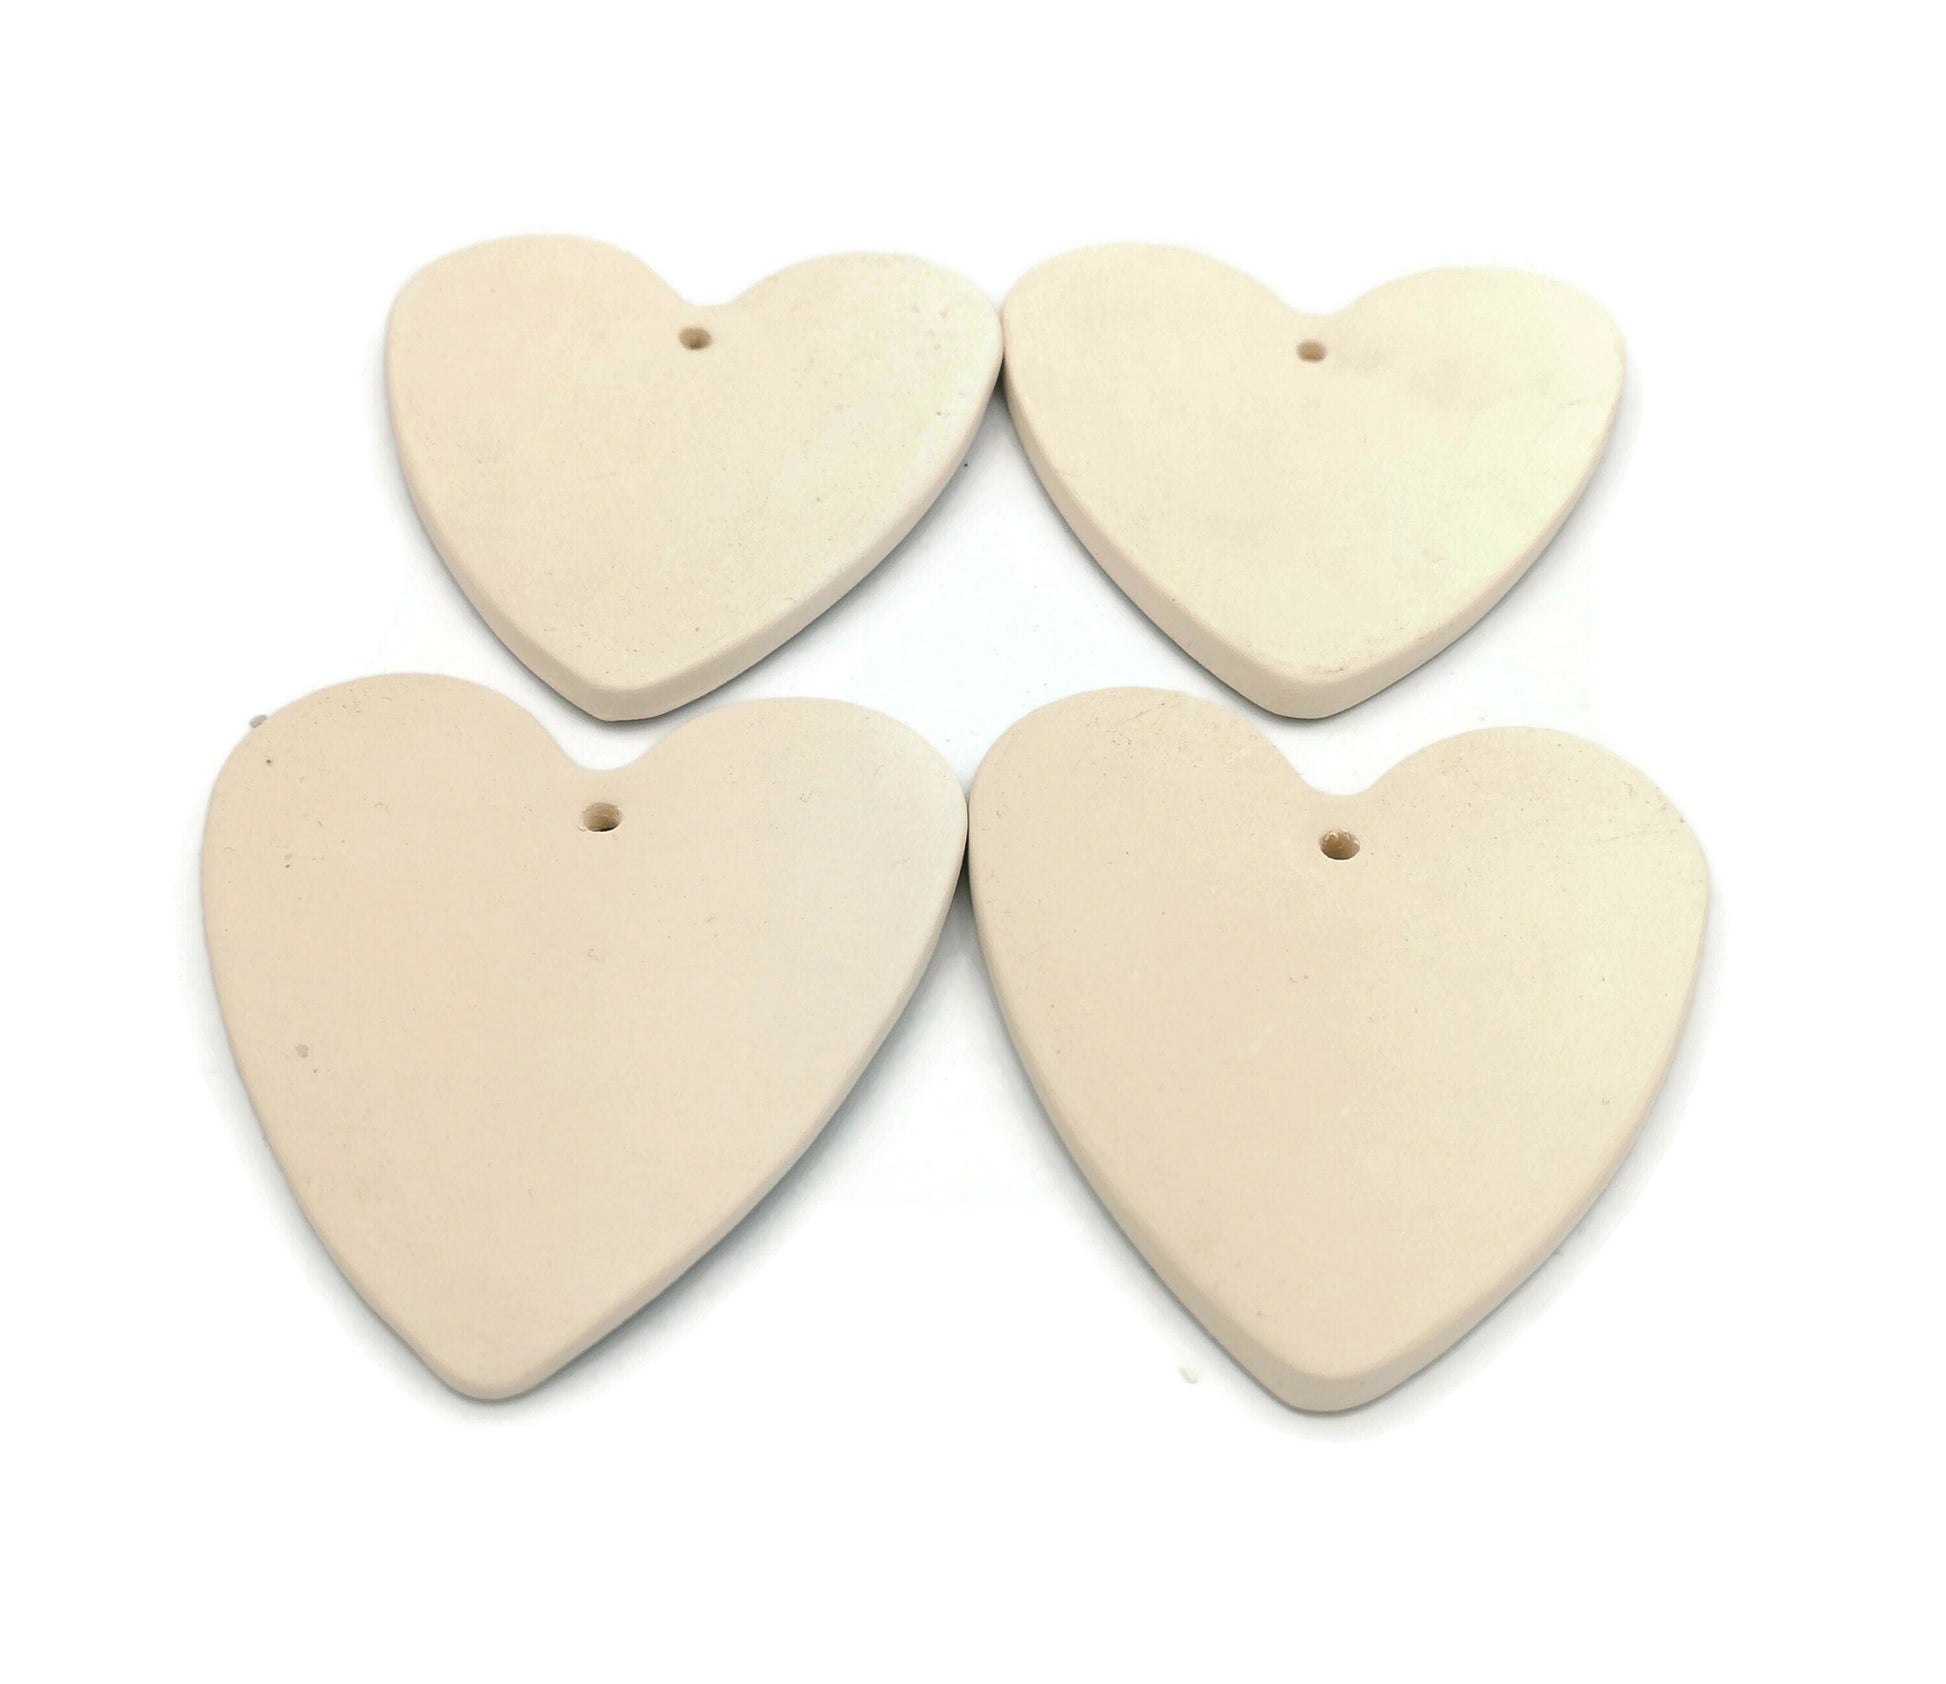 Blank Heart Charm, 4 Pc Handmade Ceramic Bisque Heart Shapes To Hang, Unpainted Diy Craft Kit For Valentines Day Ready To Paint - Ceramica Ana Rafael